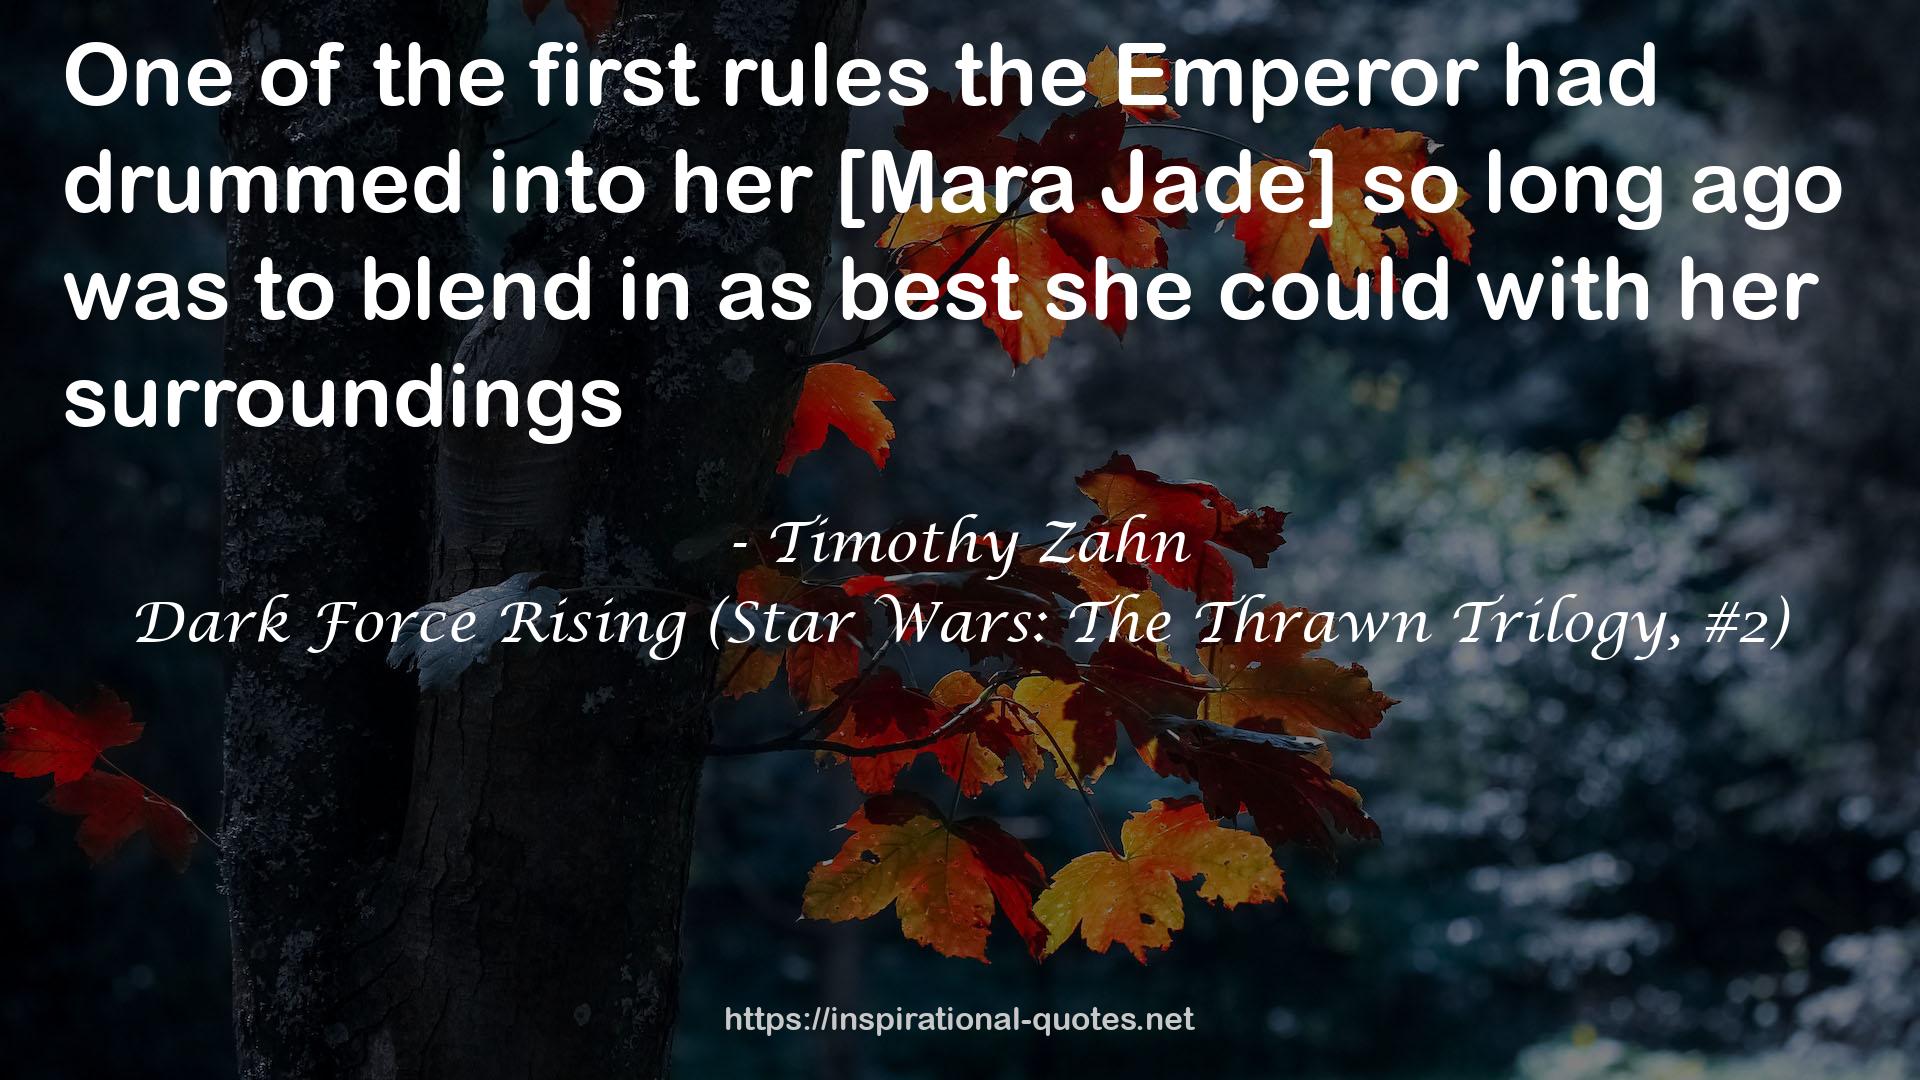 Dark Force Rising (Star Wars: The Thrawn Trilogy, #2) QUOTES